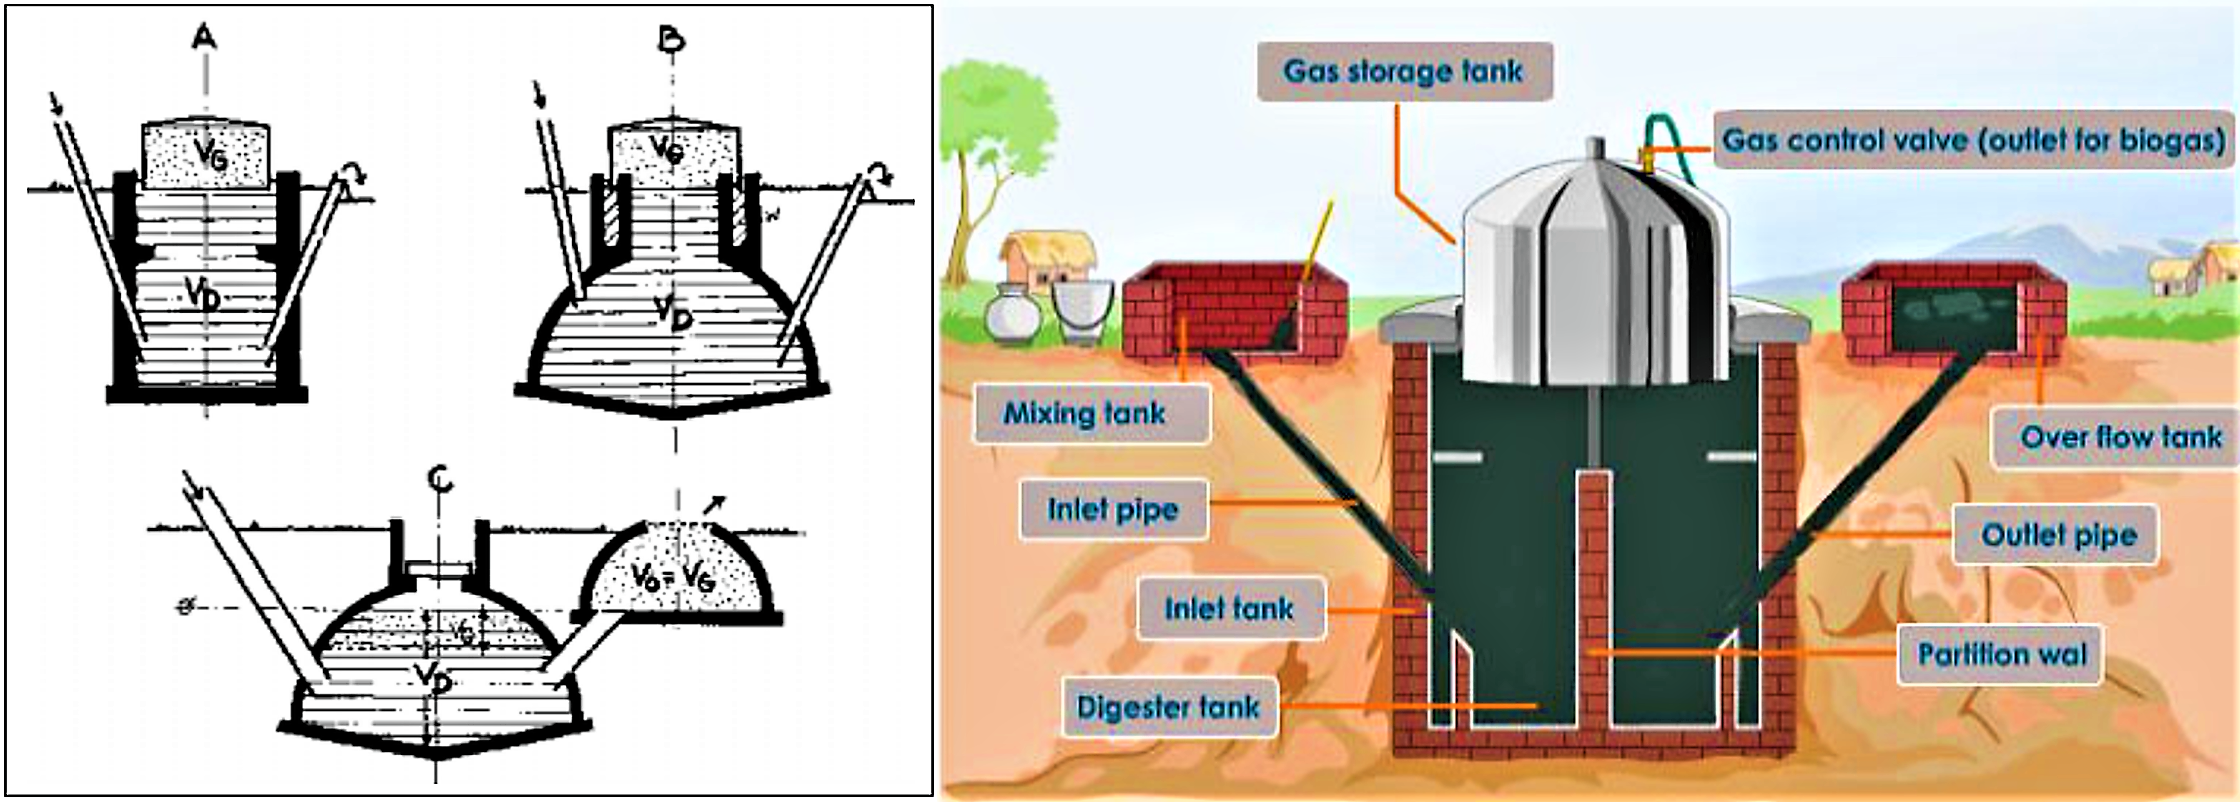 Three types of fixed-dome biogas reactor. Each biogas plant consists of a digester and a gasholder. Source: SASSE (1988) and TUTORVISTA (2010)